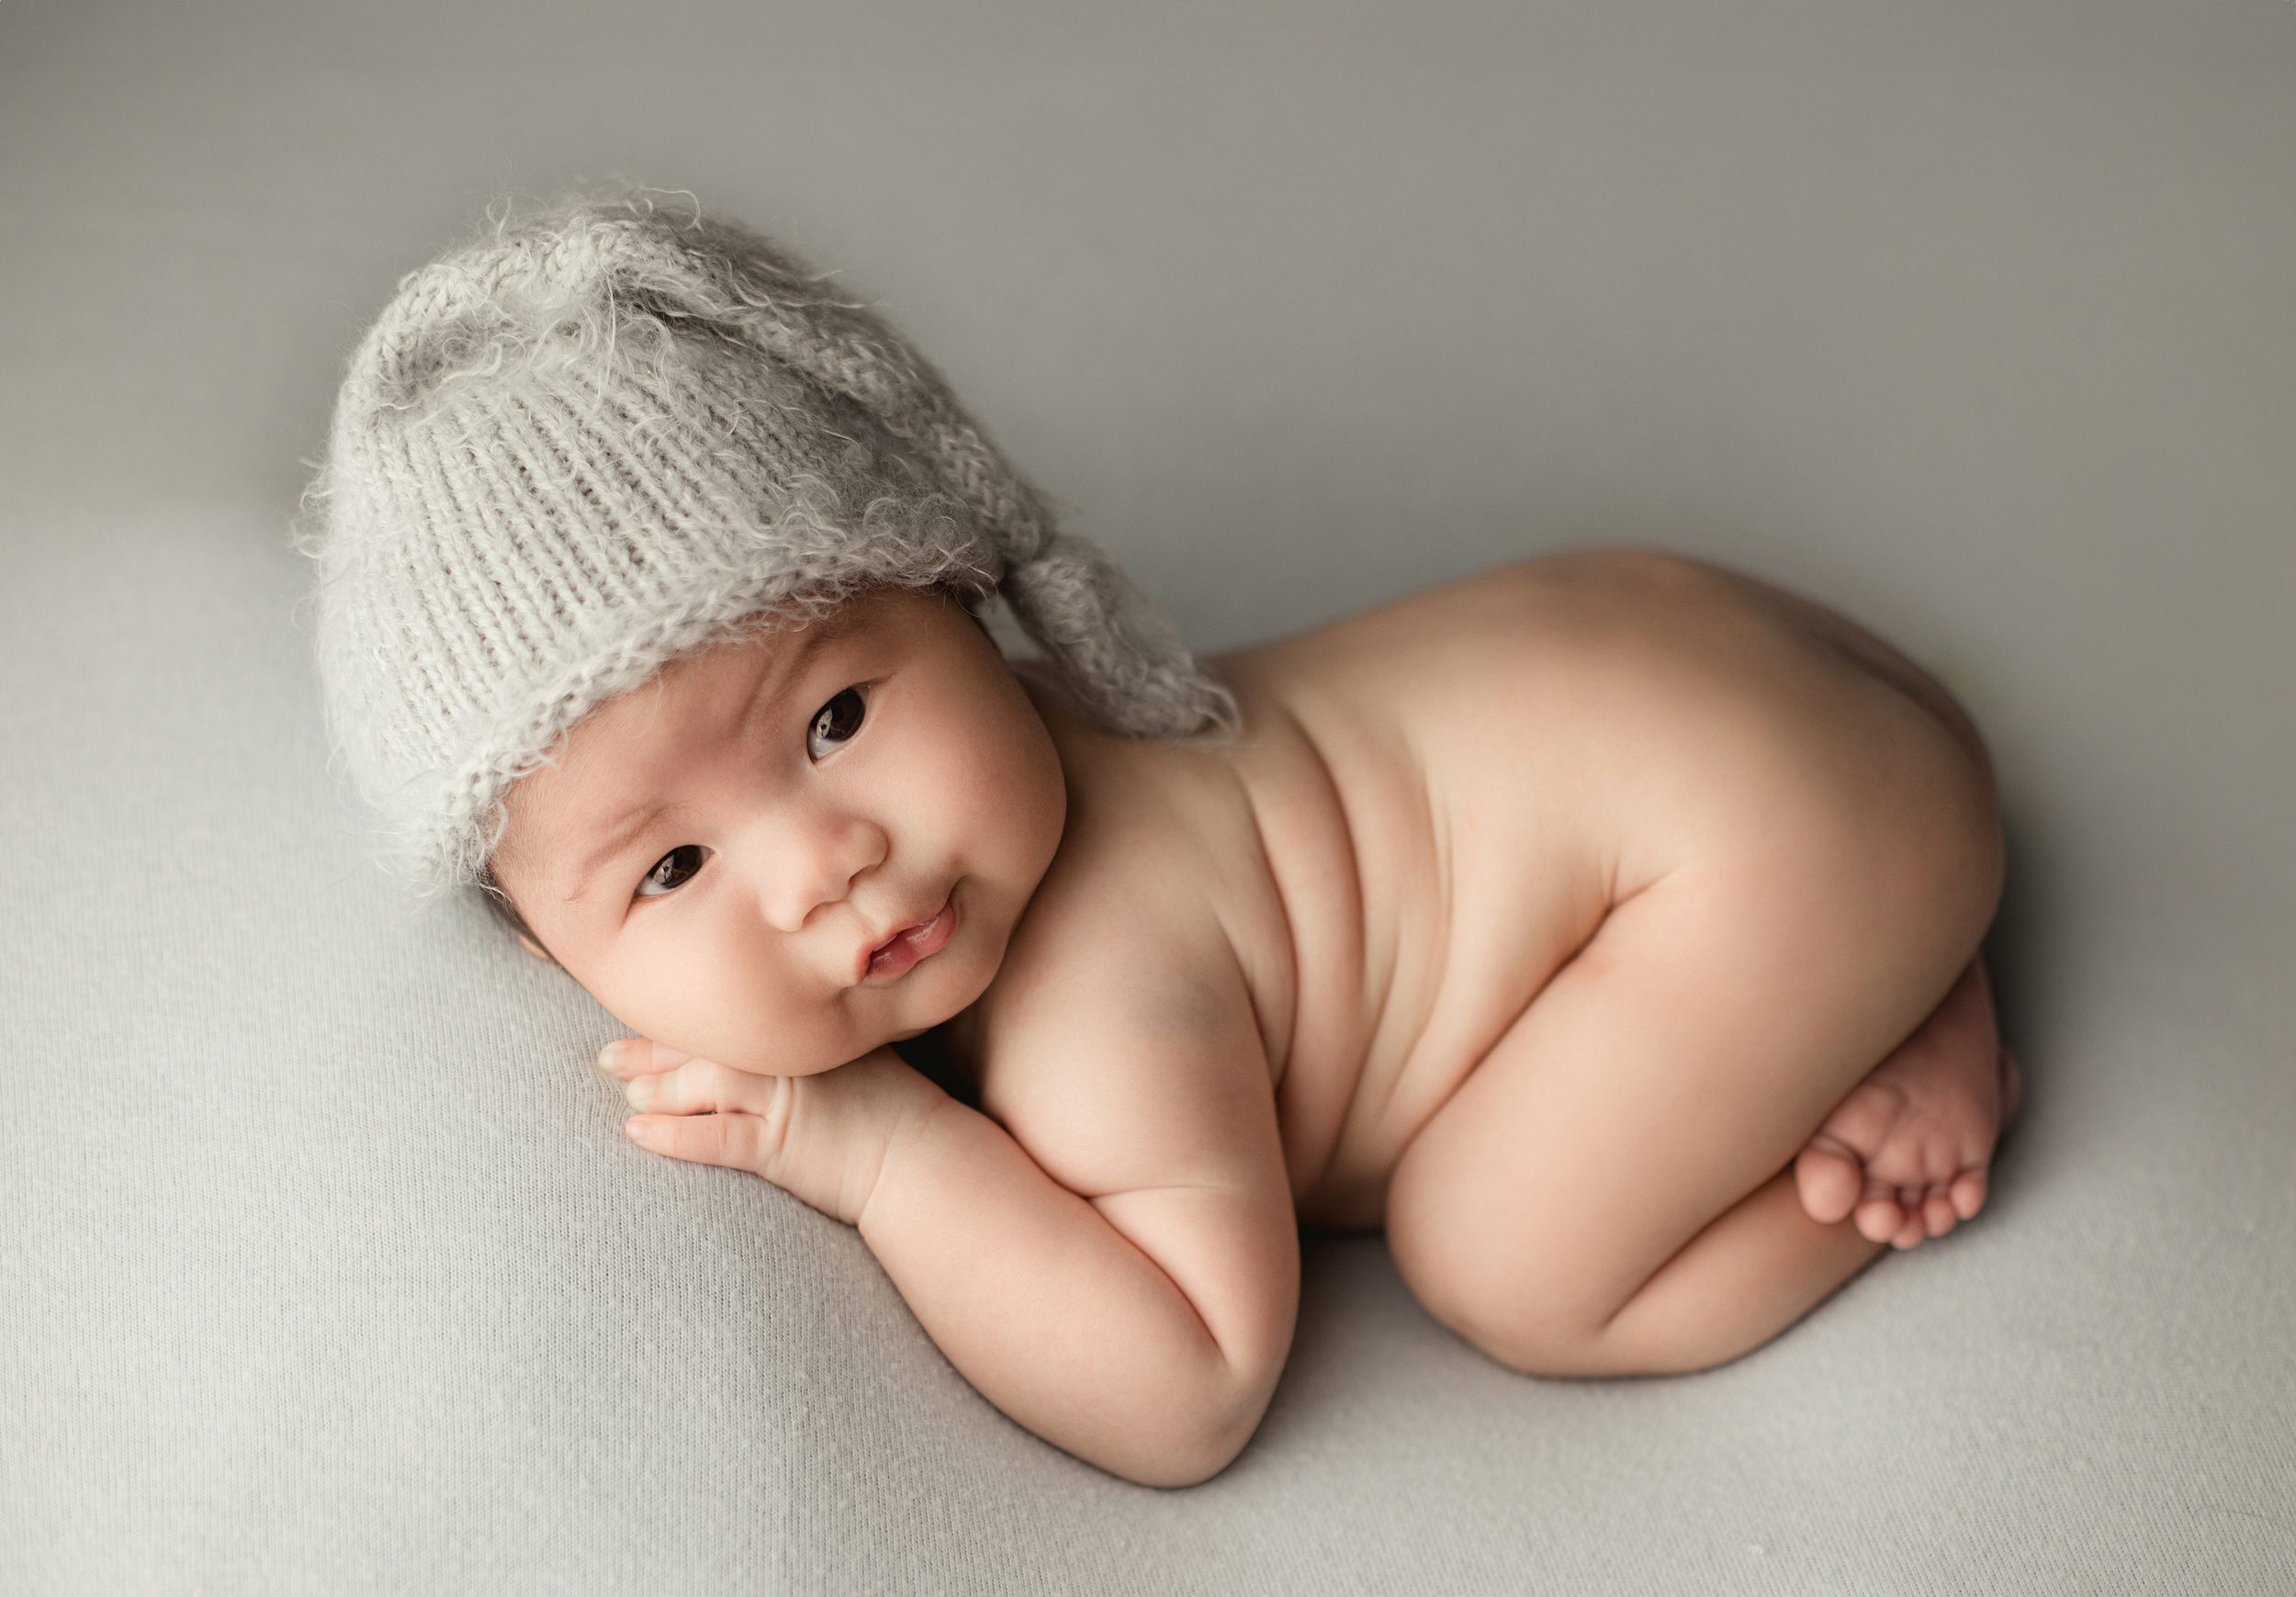 A newborn baby lays on a pad in only a knit night cap in froggy pose after meeting orange county doulas